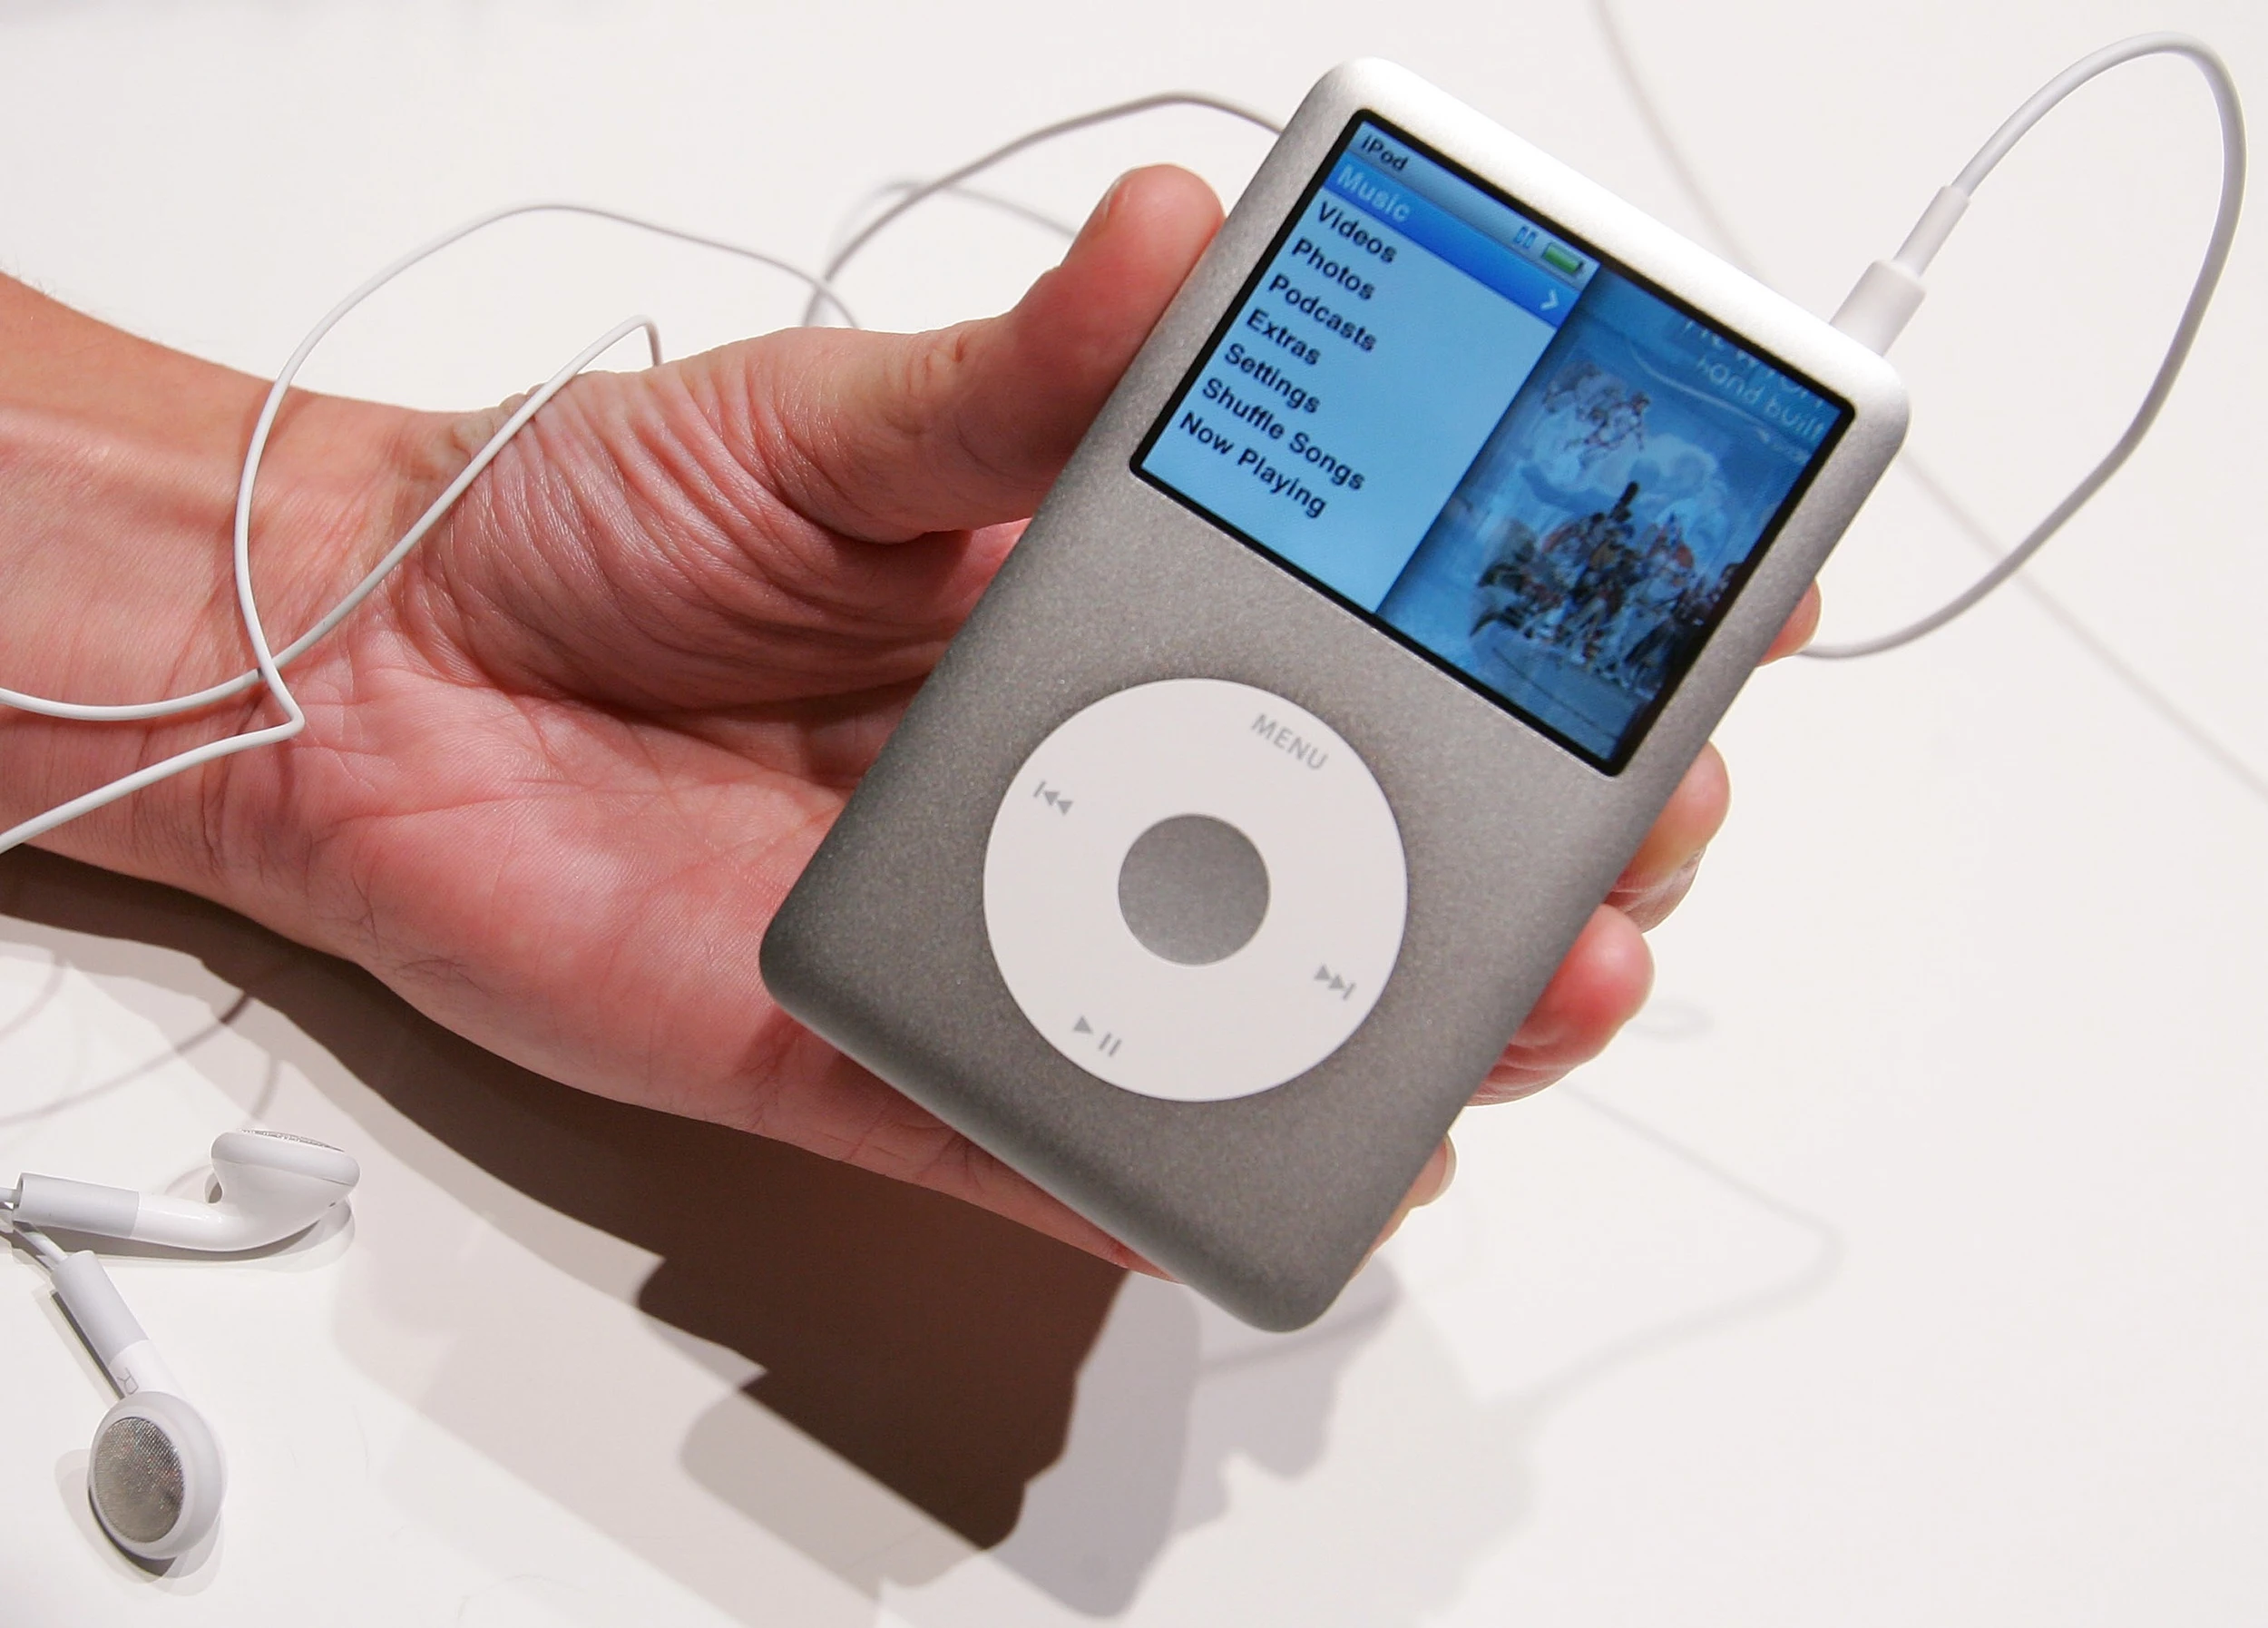 download the last version for ipod CpuFrequenz 4.21